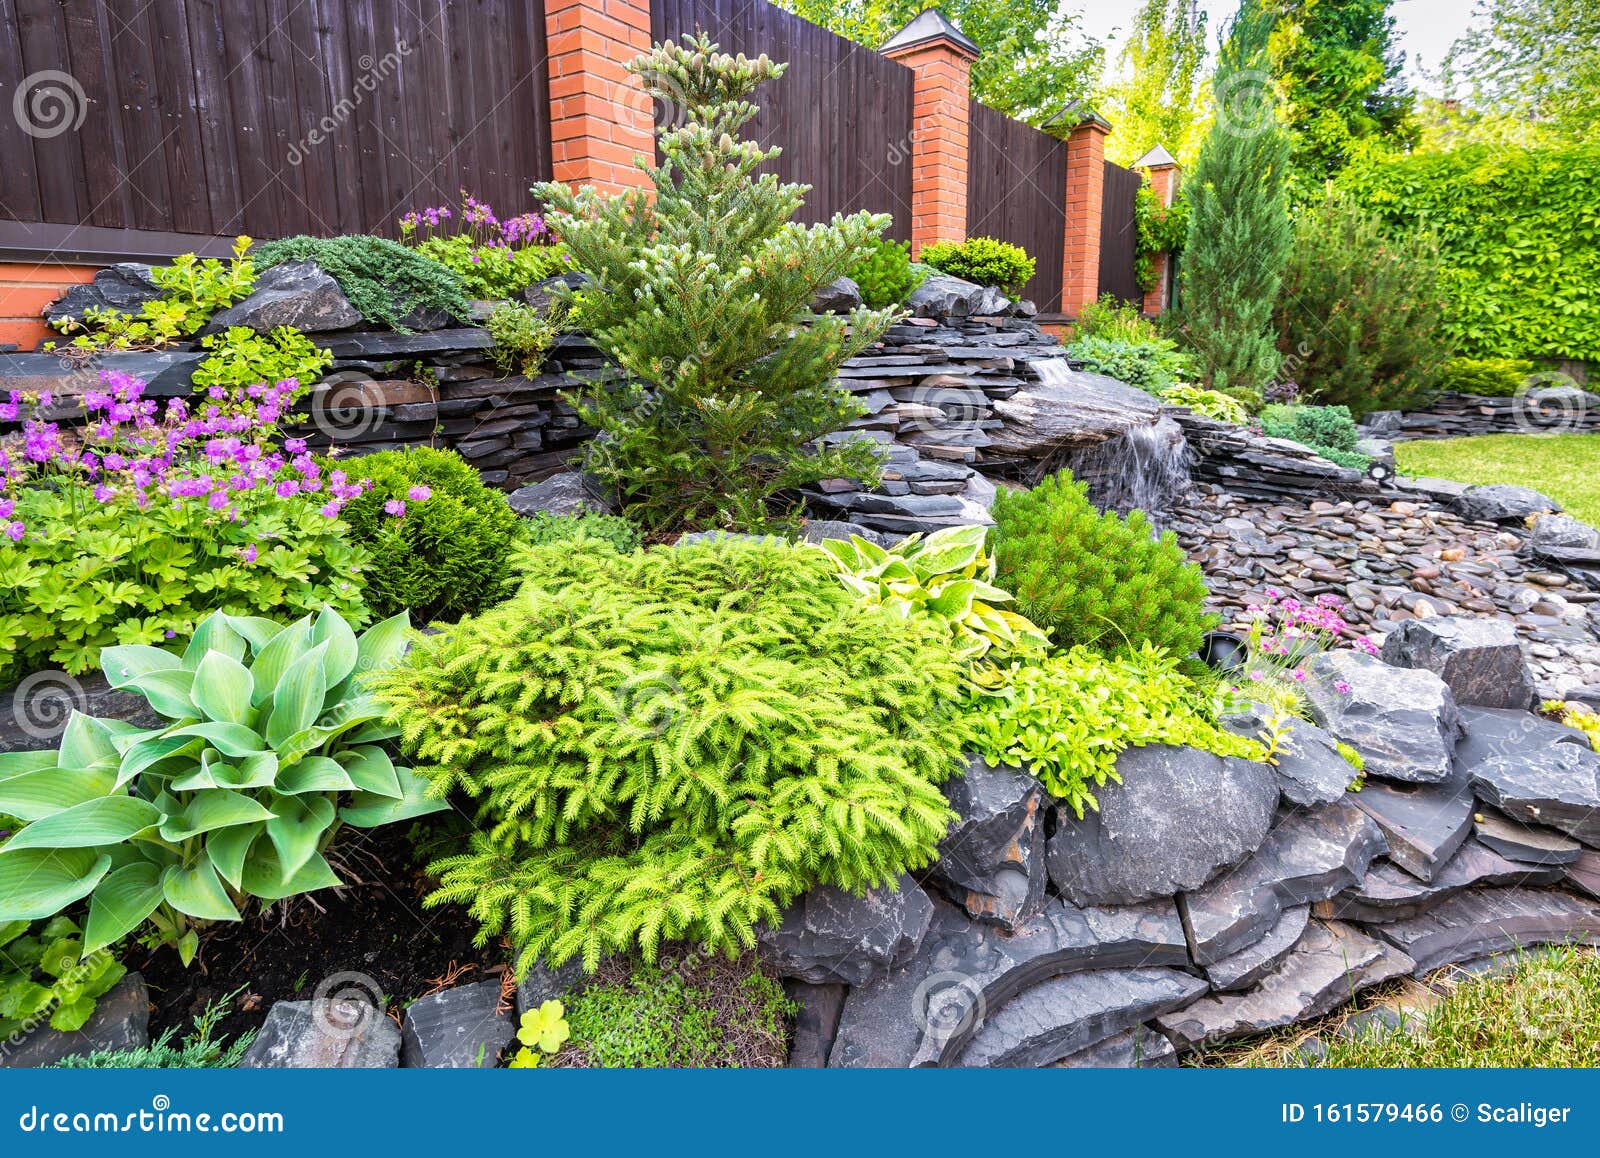 Natural Stone Landscaping In Backyard In Summer Stock Photo Image Of Garden